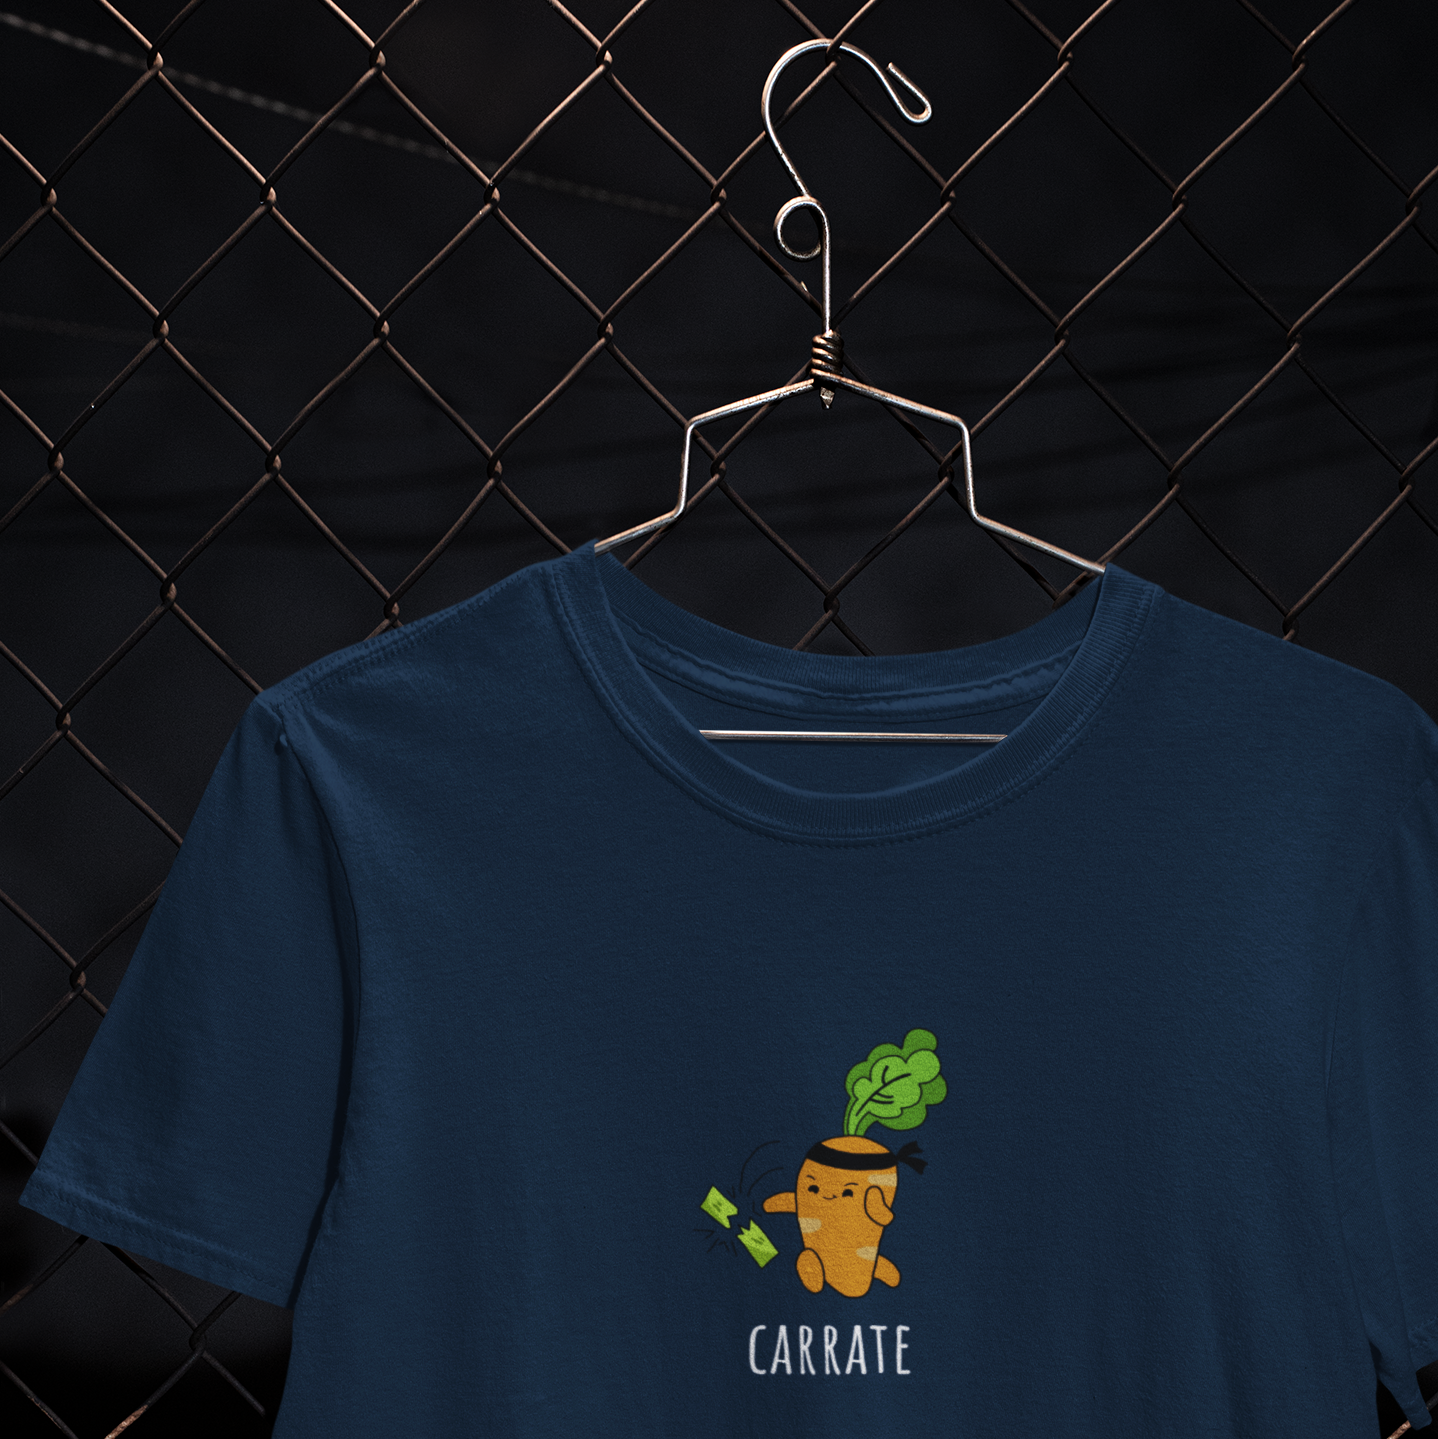 orange animated carrot with black headband chopping green leafy vegetables with karate chop on navy blue t-shirt.